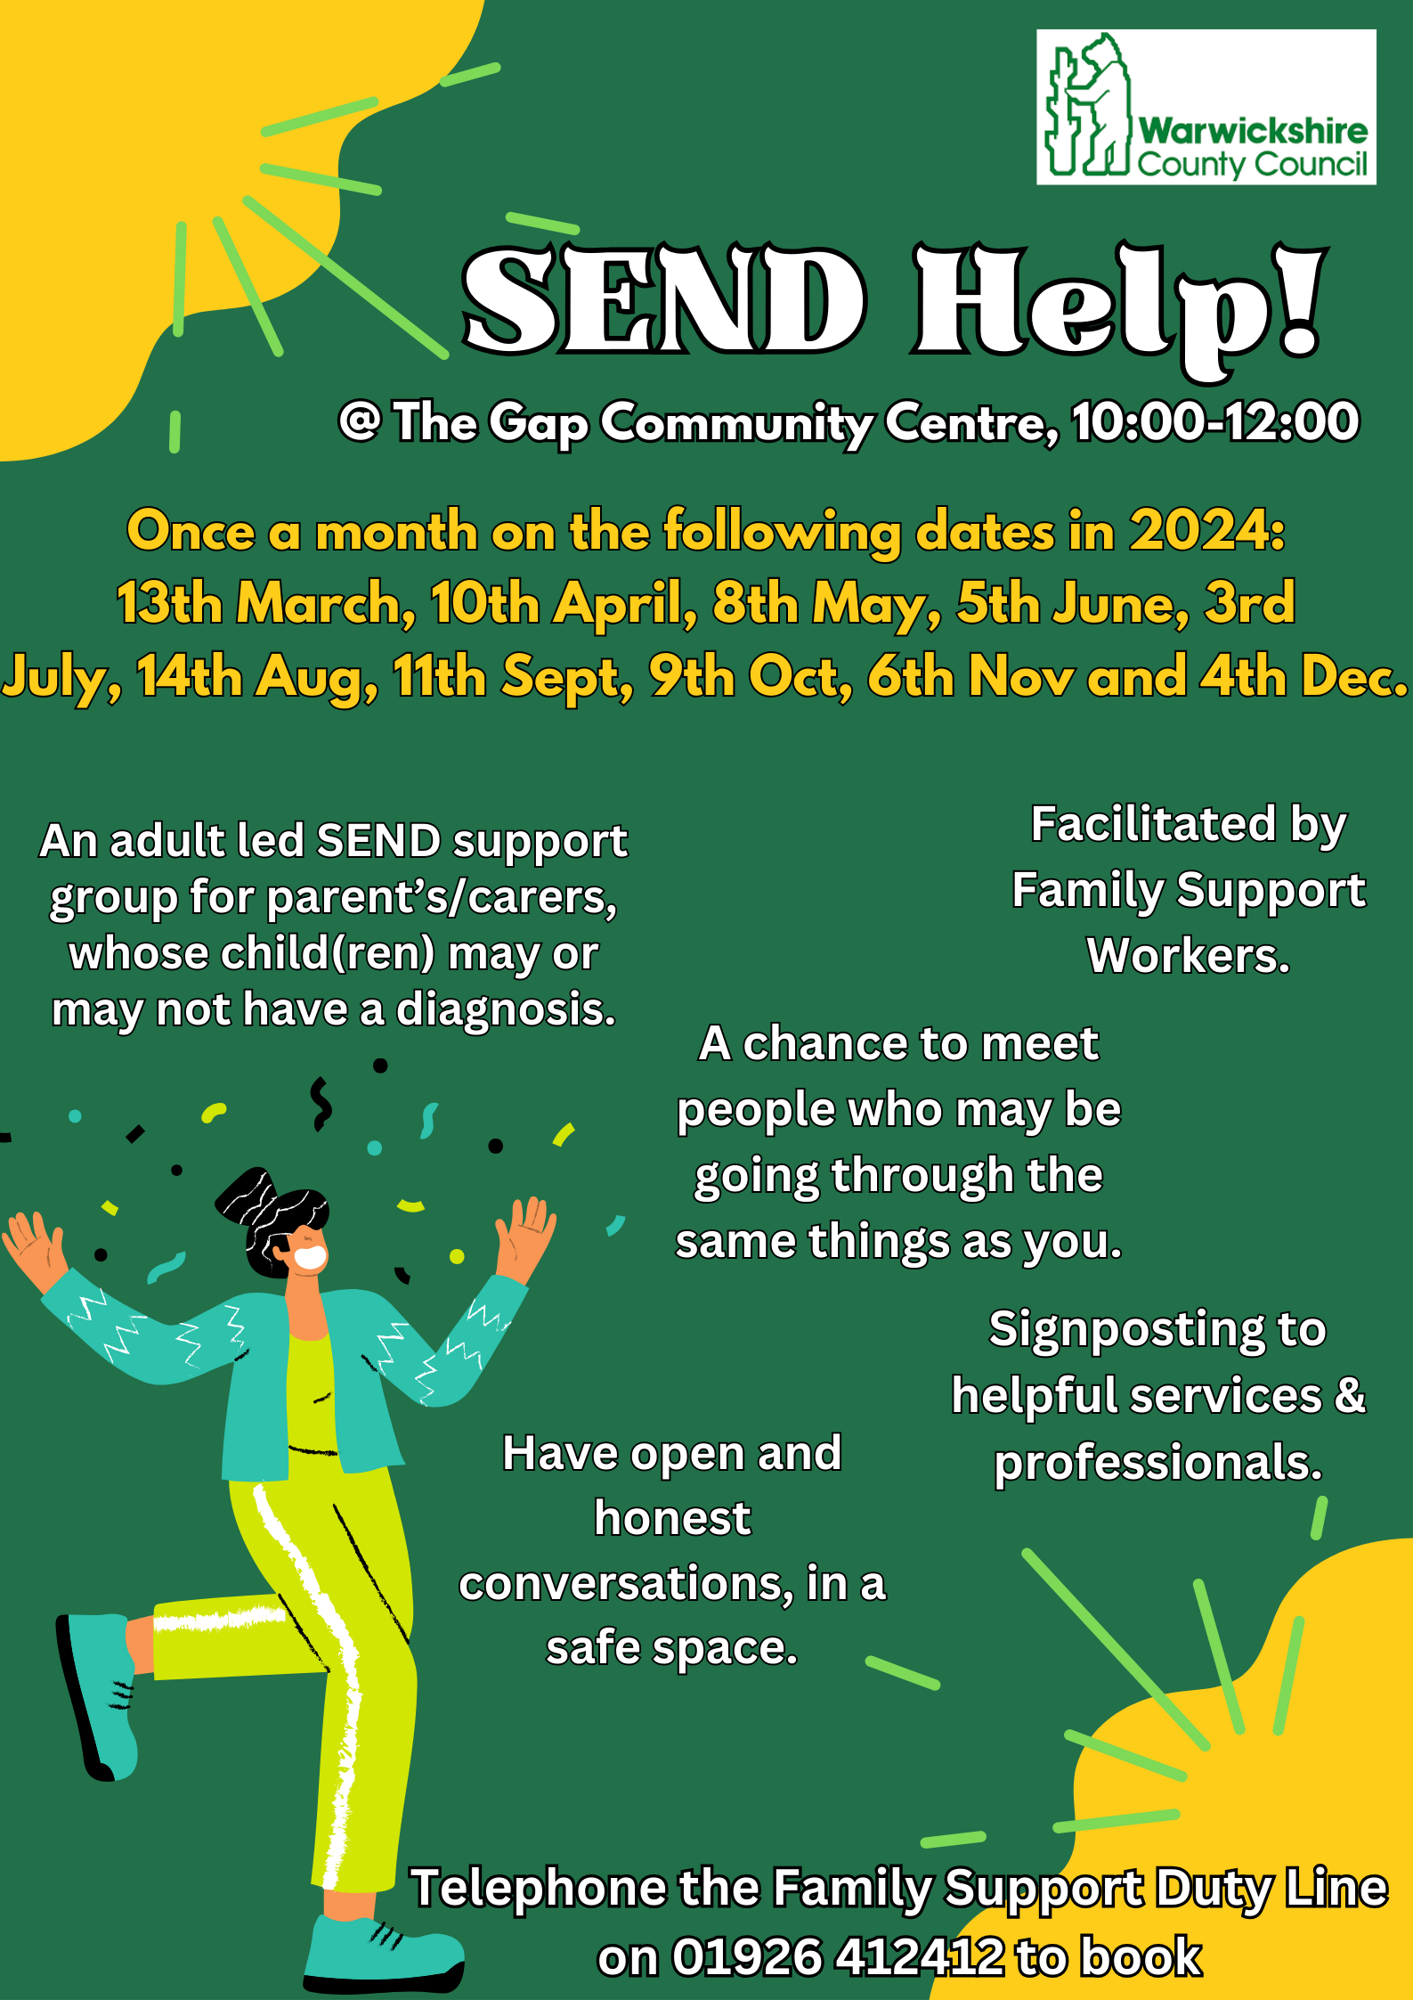 SEND Help poster updated dates